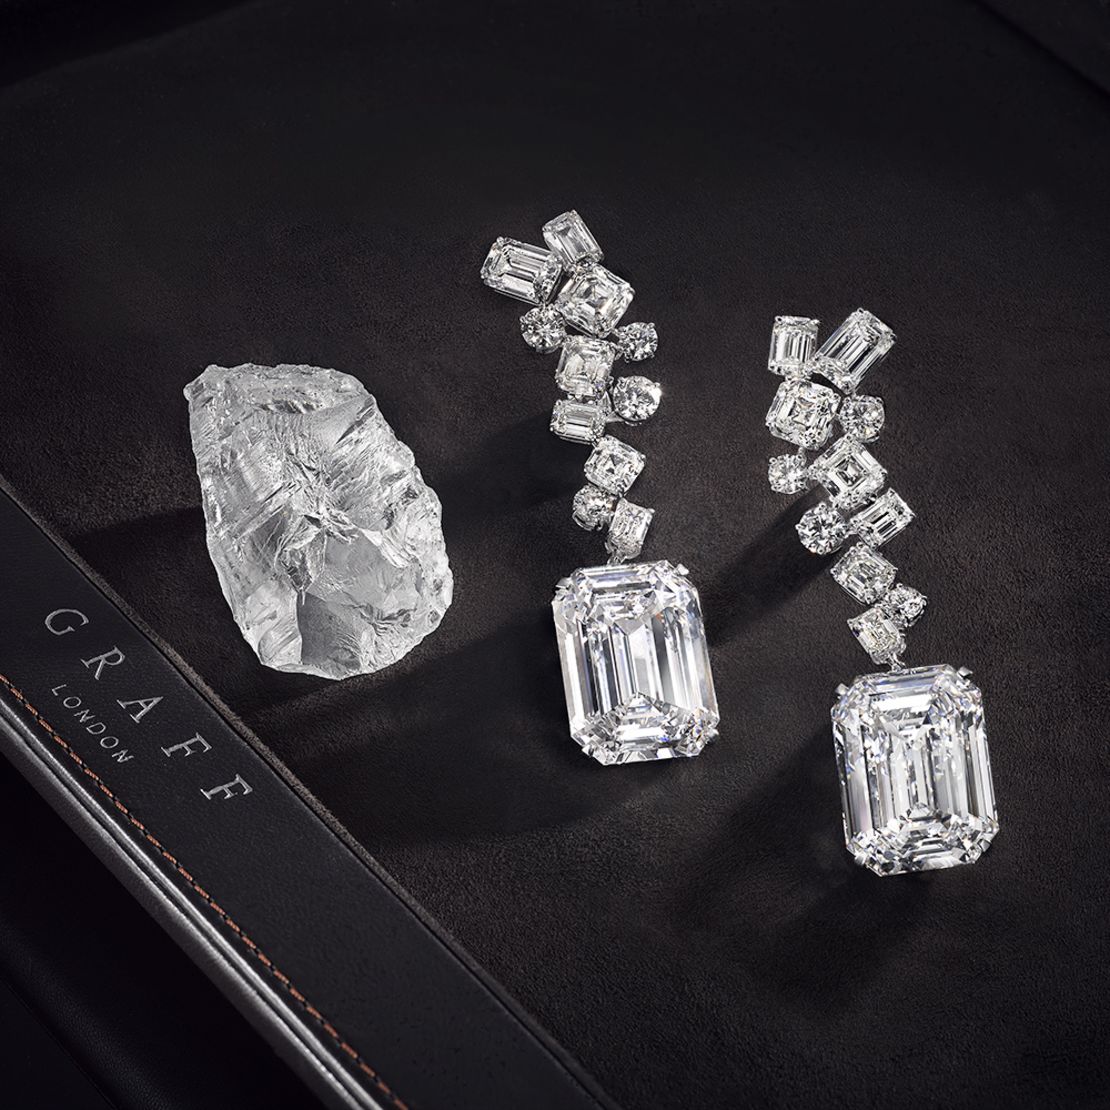 How Rough Diamonds Are Becoming Status Symbols, and More – Robb Report